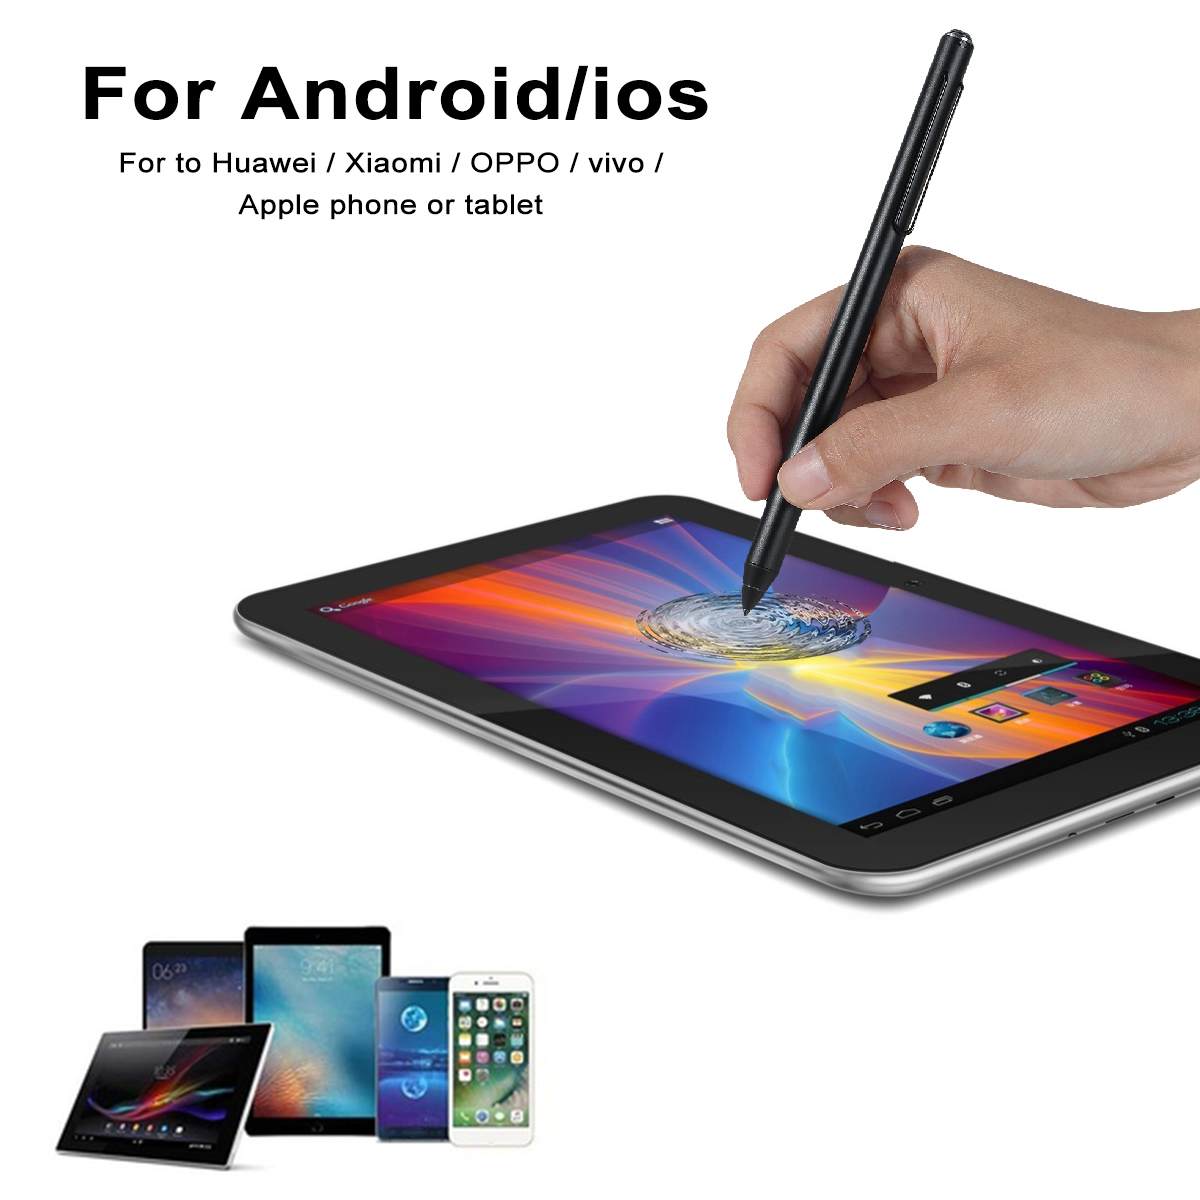 USB-Touch-Screen-Stylus-Pen-Capacitive-For-All-Mobile-Phone-Xiaomi-Huawei-1635379-4